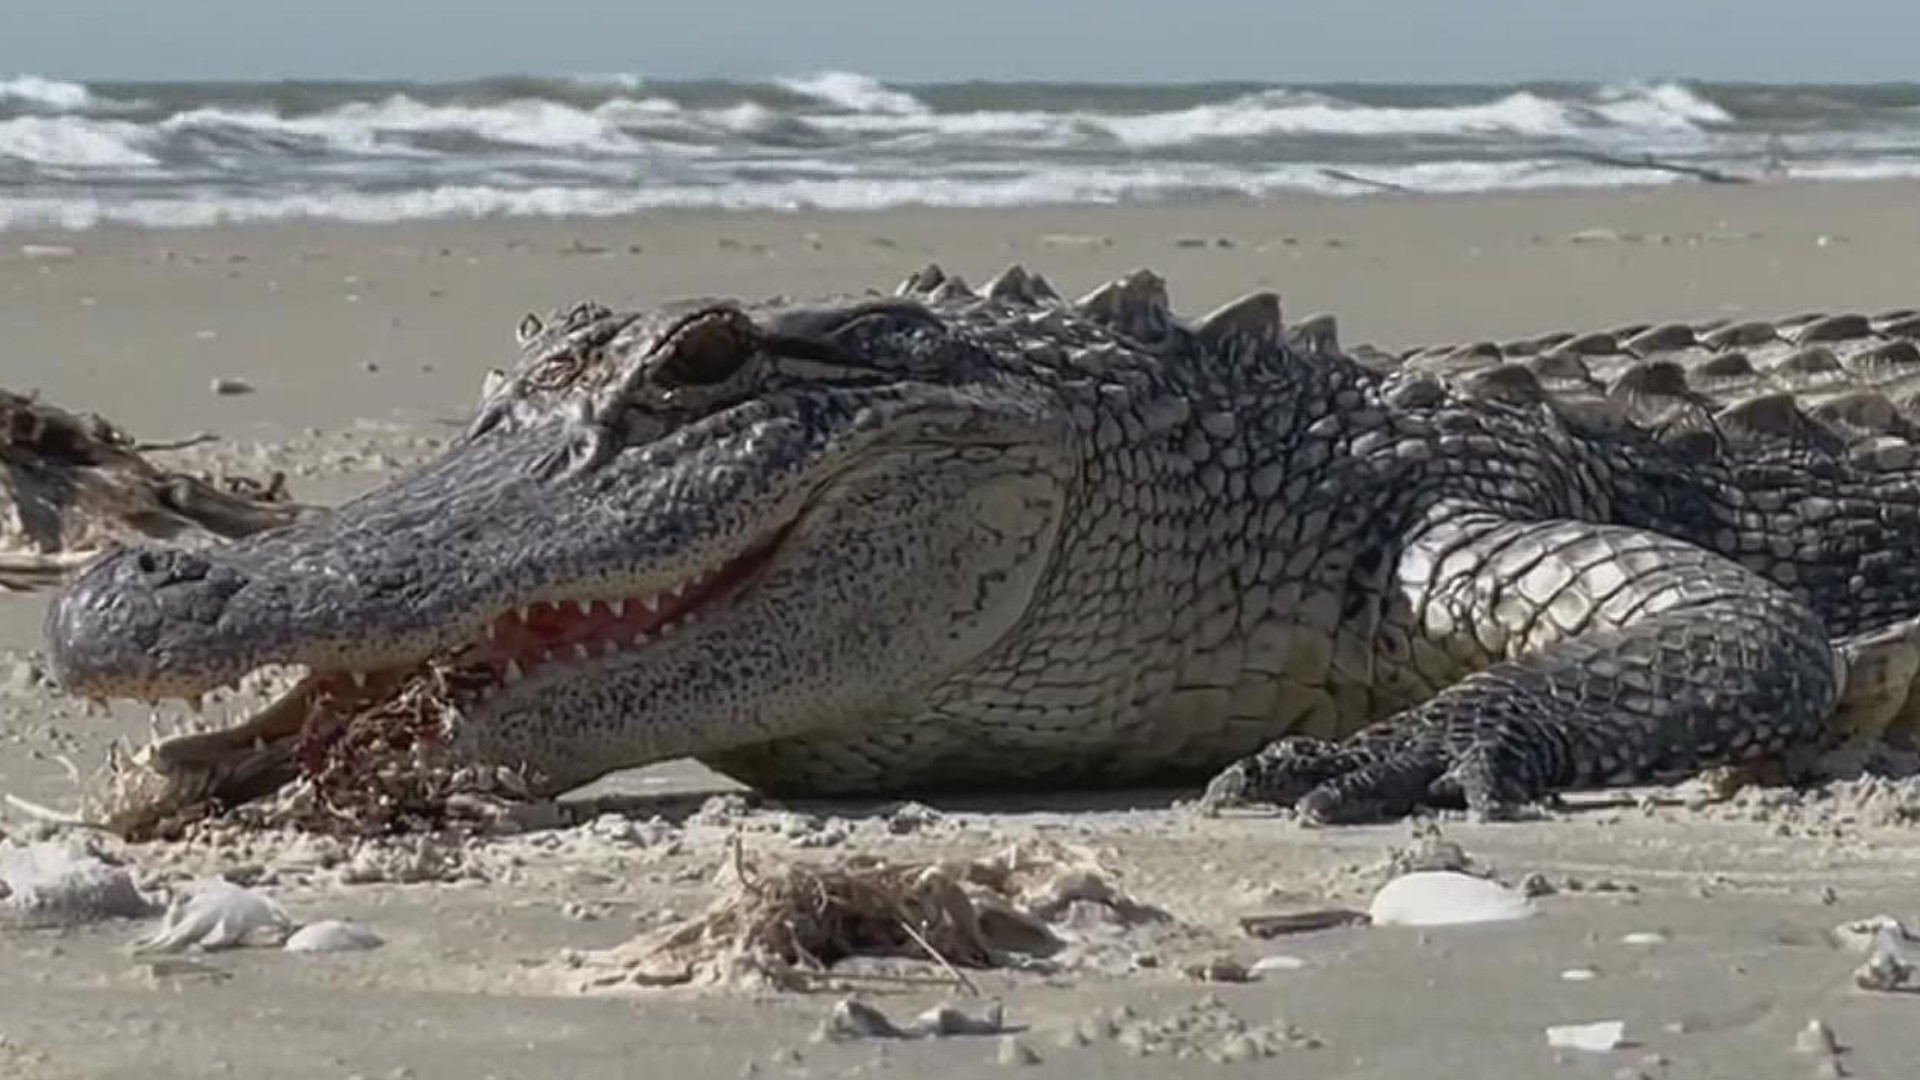 A stranded alligator was found near Matagorda Island, north of Port Aransas. And it's now in the care of the Amos Rehabilitation Keep.